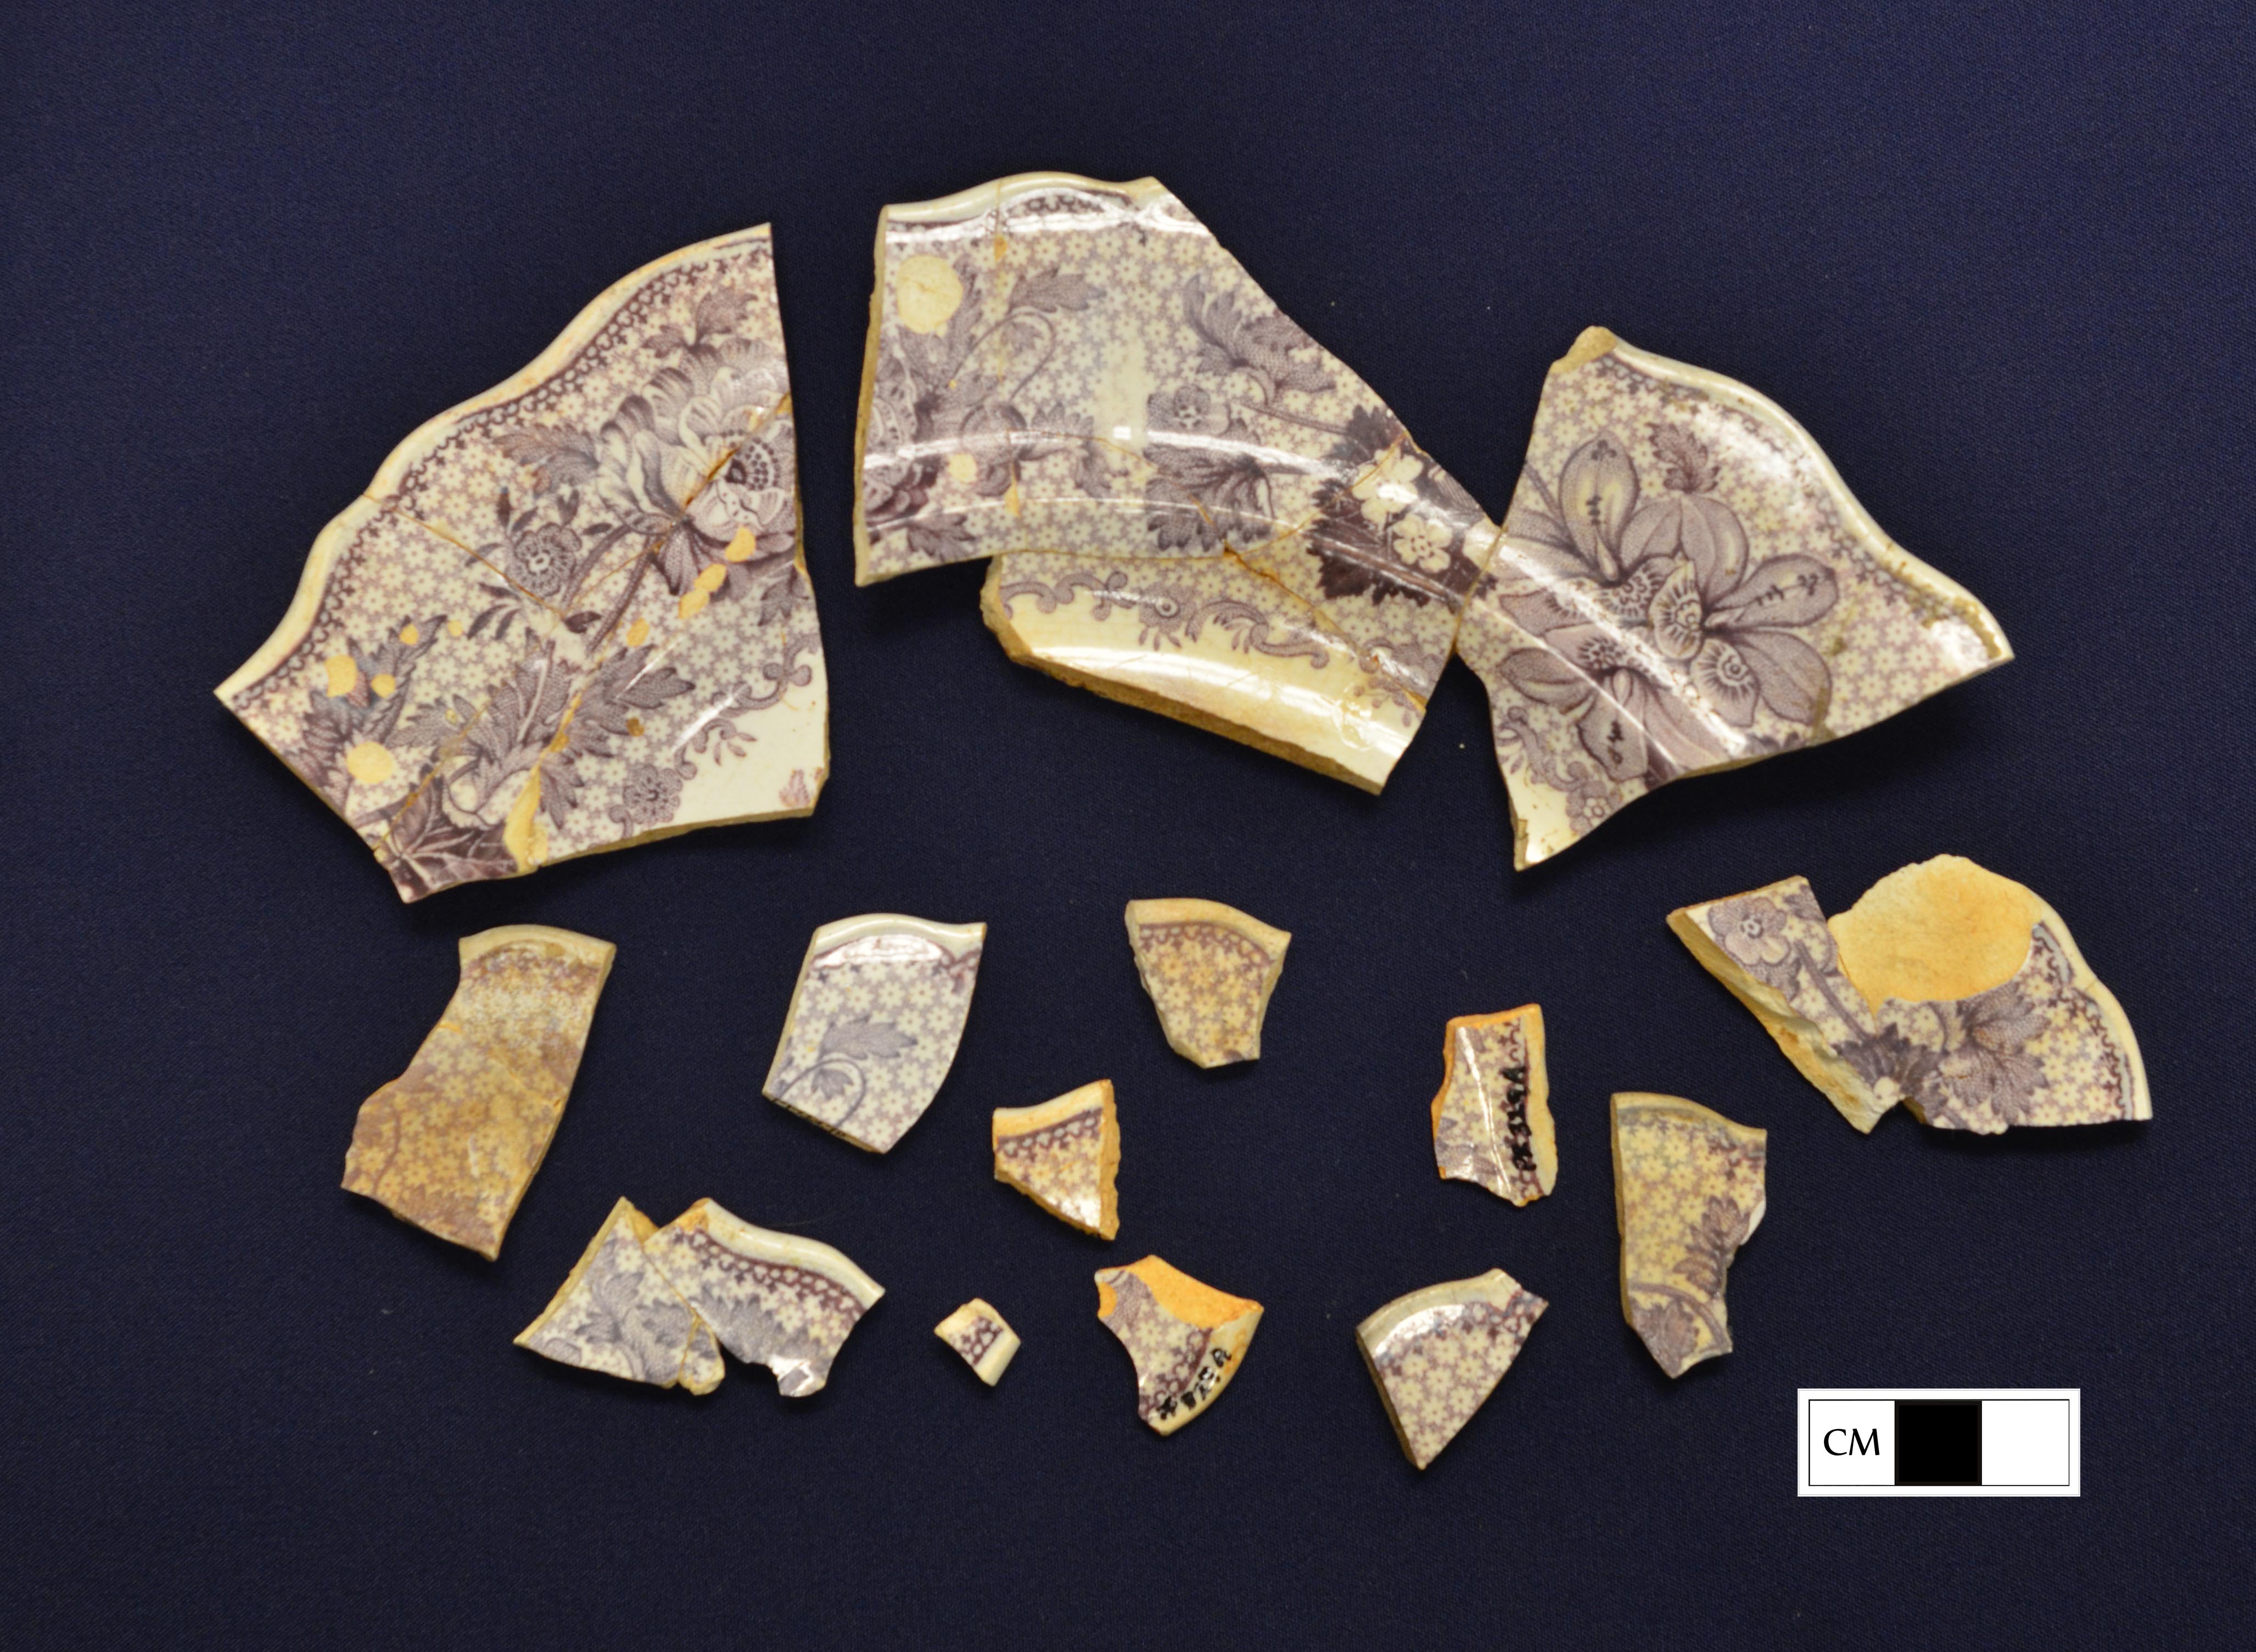 A mulberry transferprinted plate, with some slightly burned sherds.